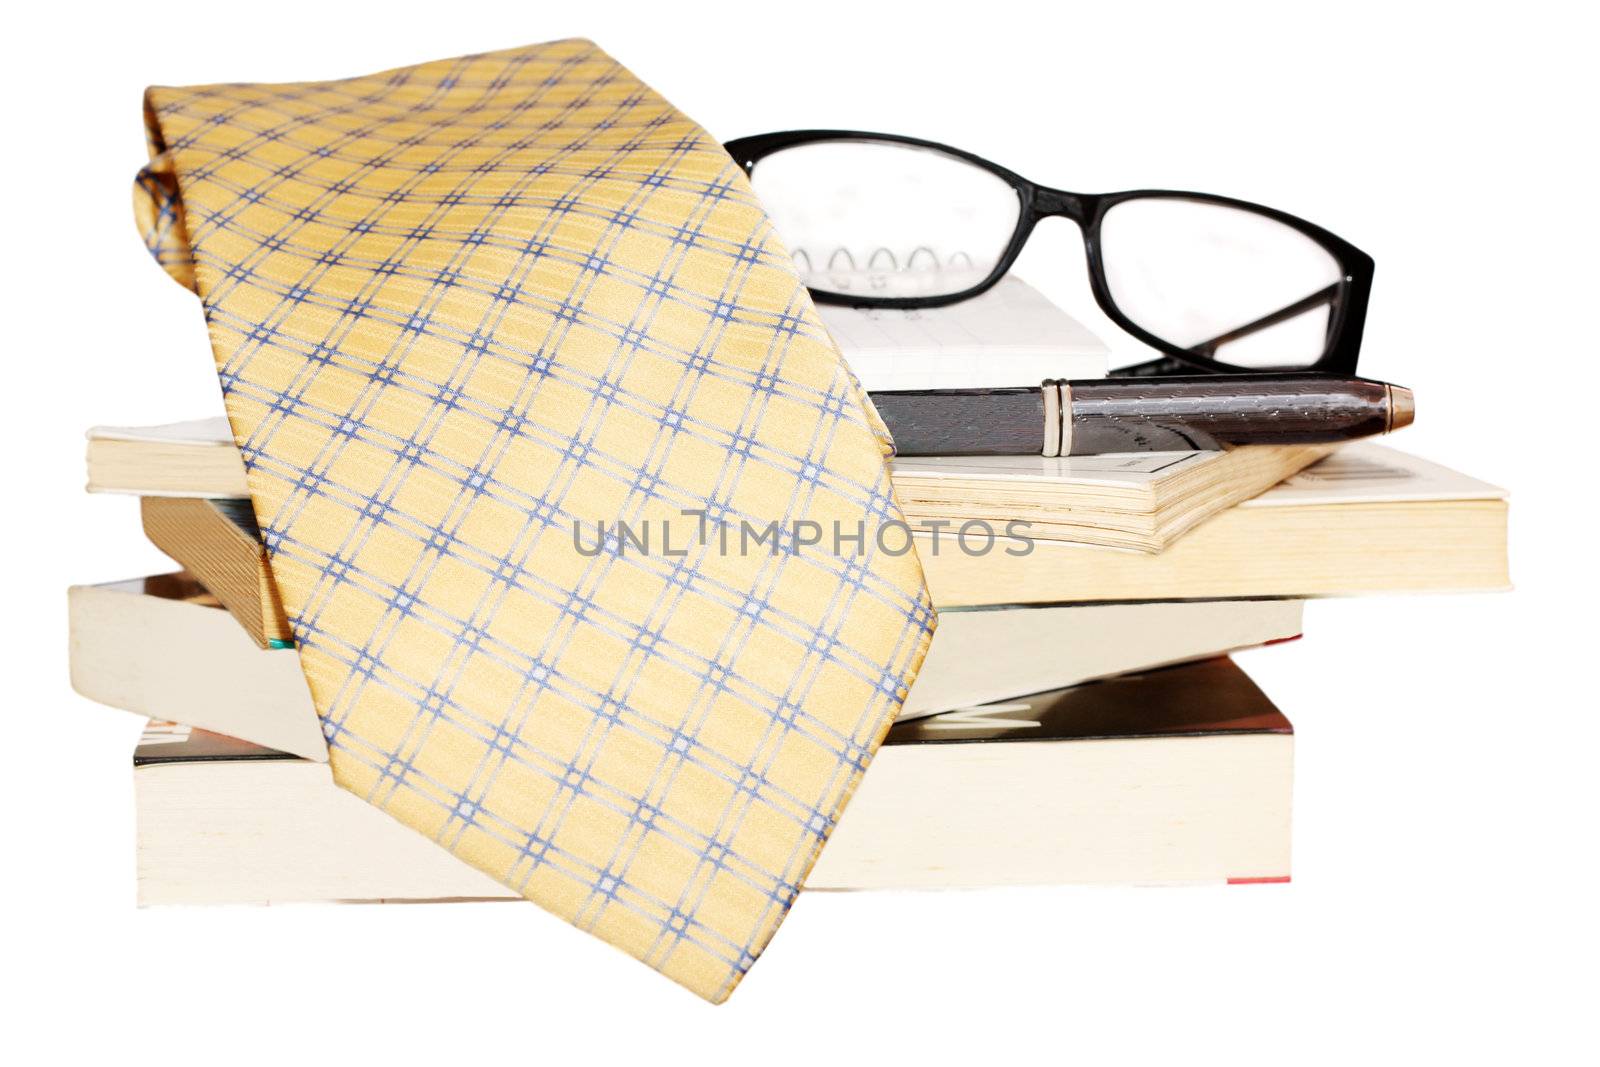 Pen, lens, pile of books and tie